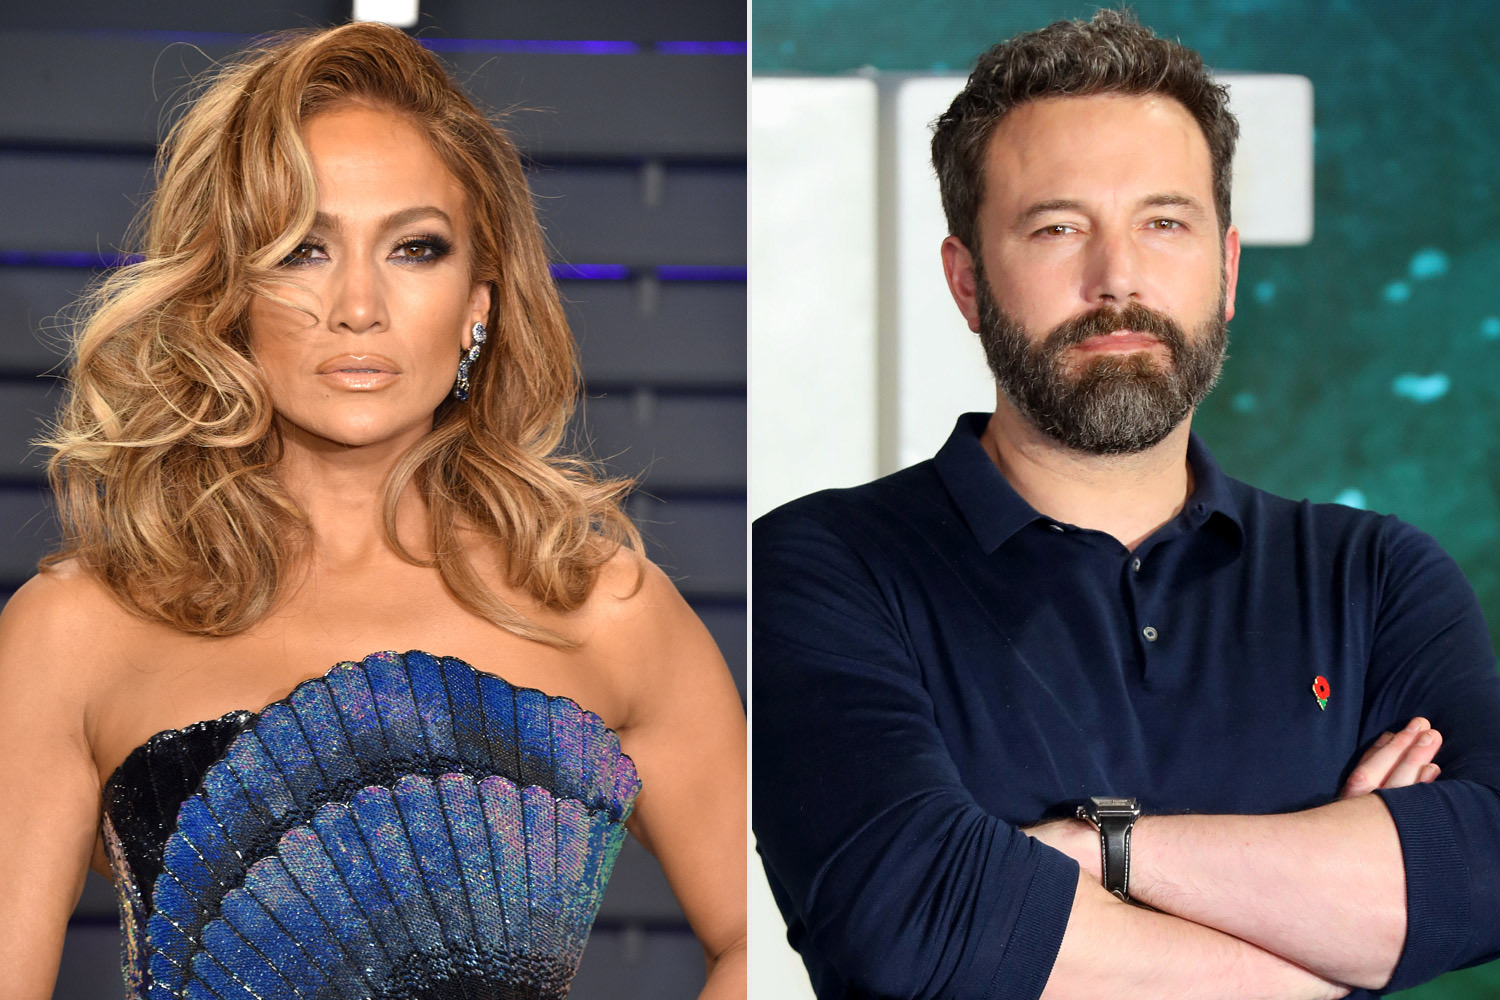 Jennifer Lopez After Split From Rodriguez Confirms Reunion With Actor, Ben Affleck As They Kiss In Public